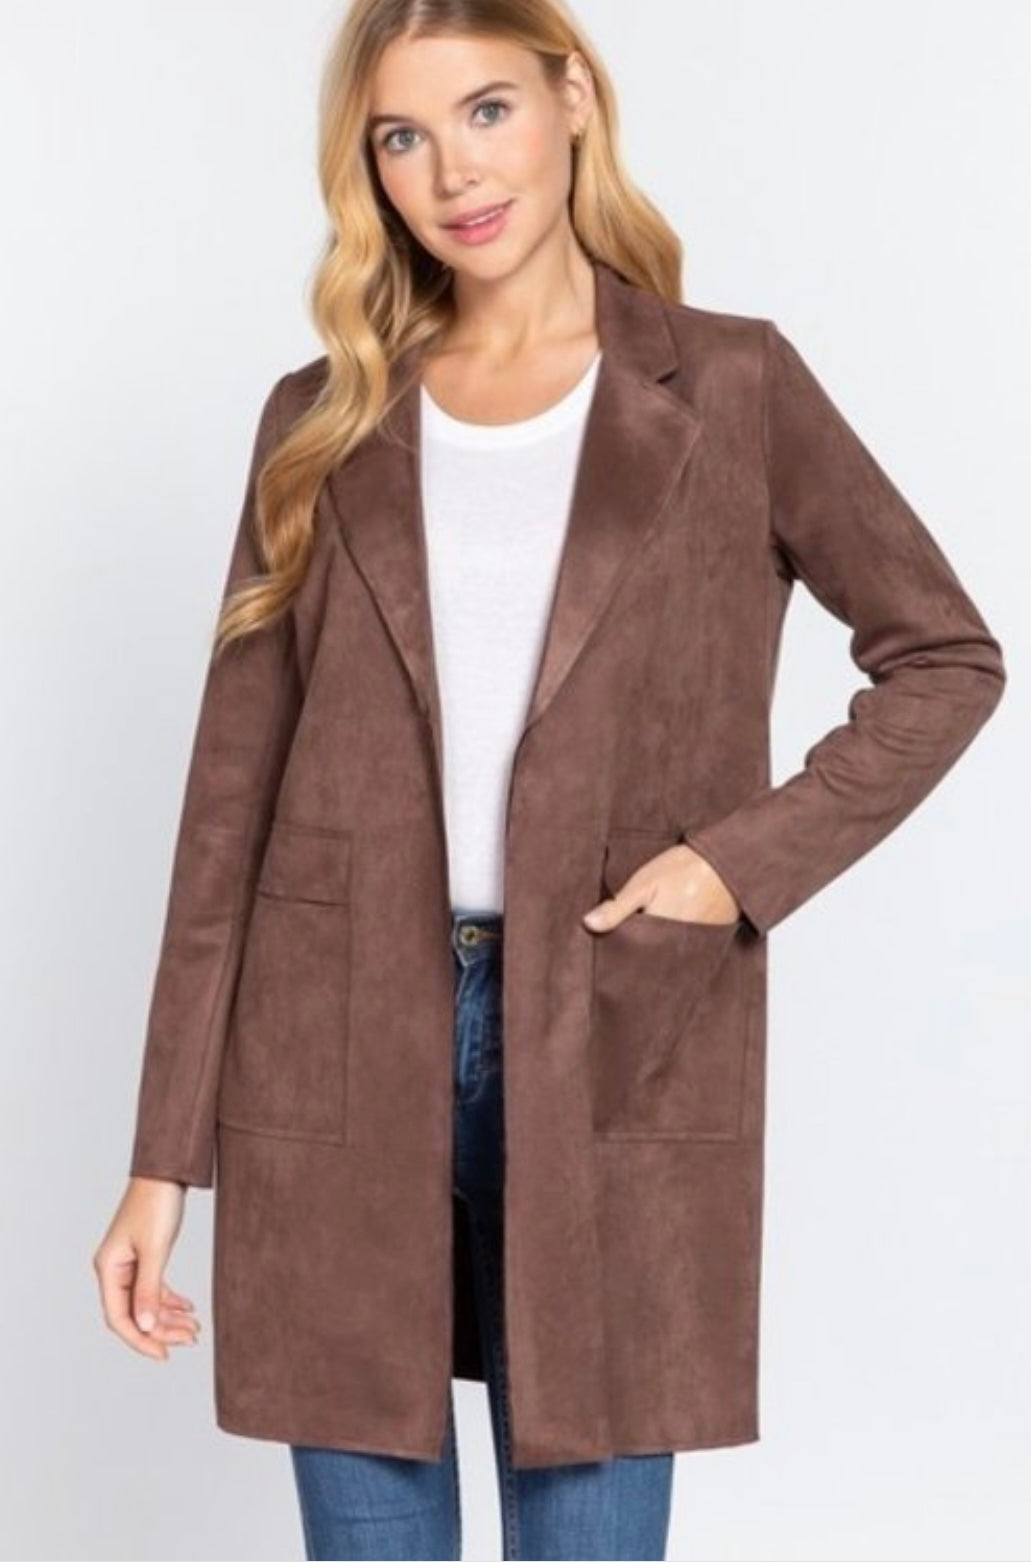 Clarissa Long Suede Jacket - Corinne Boutique Family Owned and Operated USA